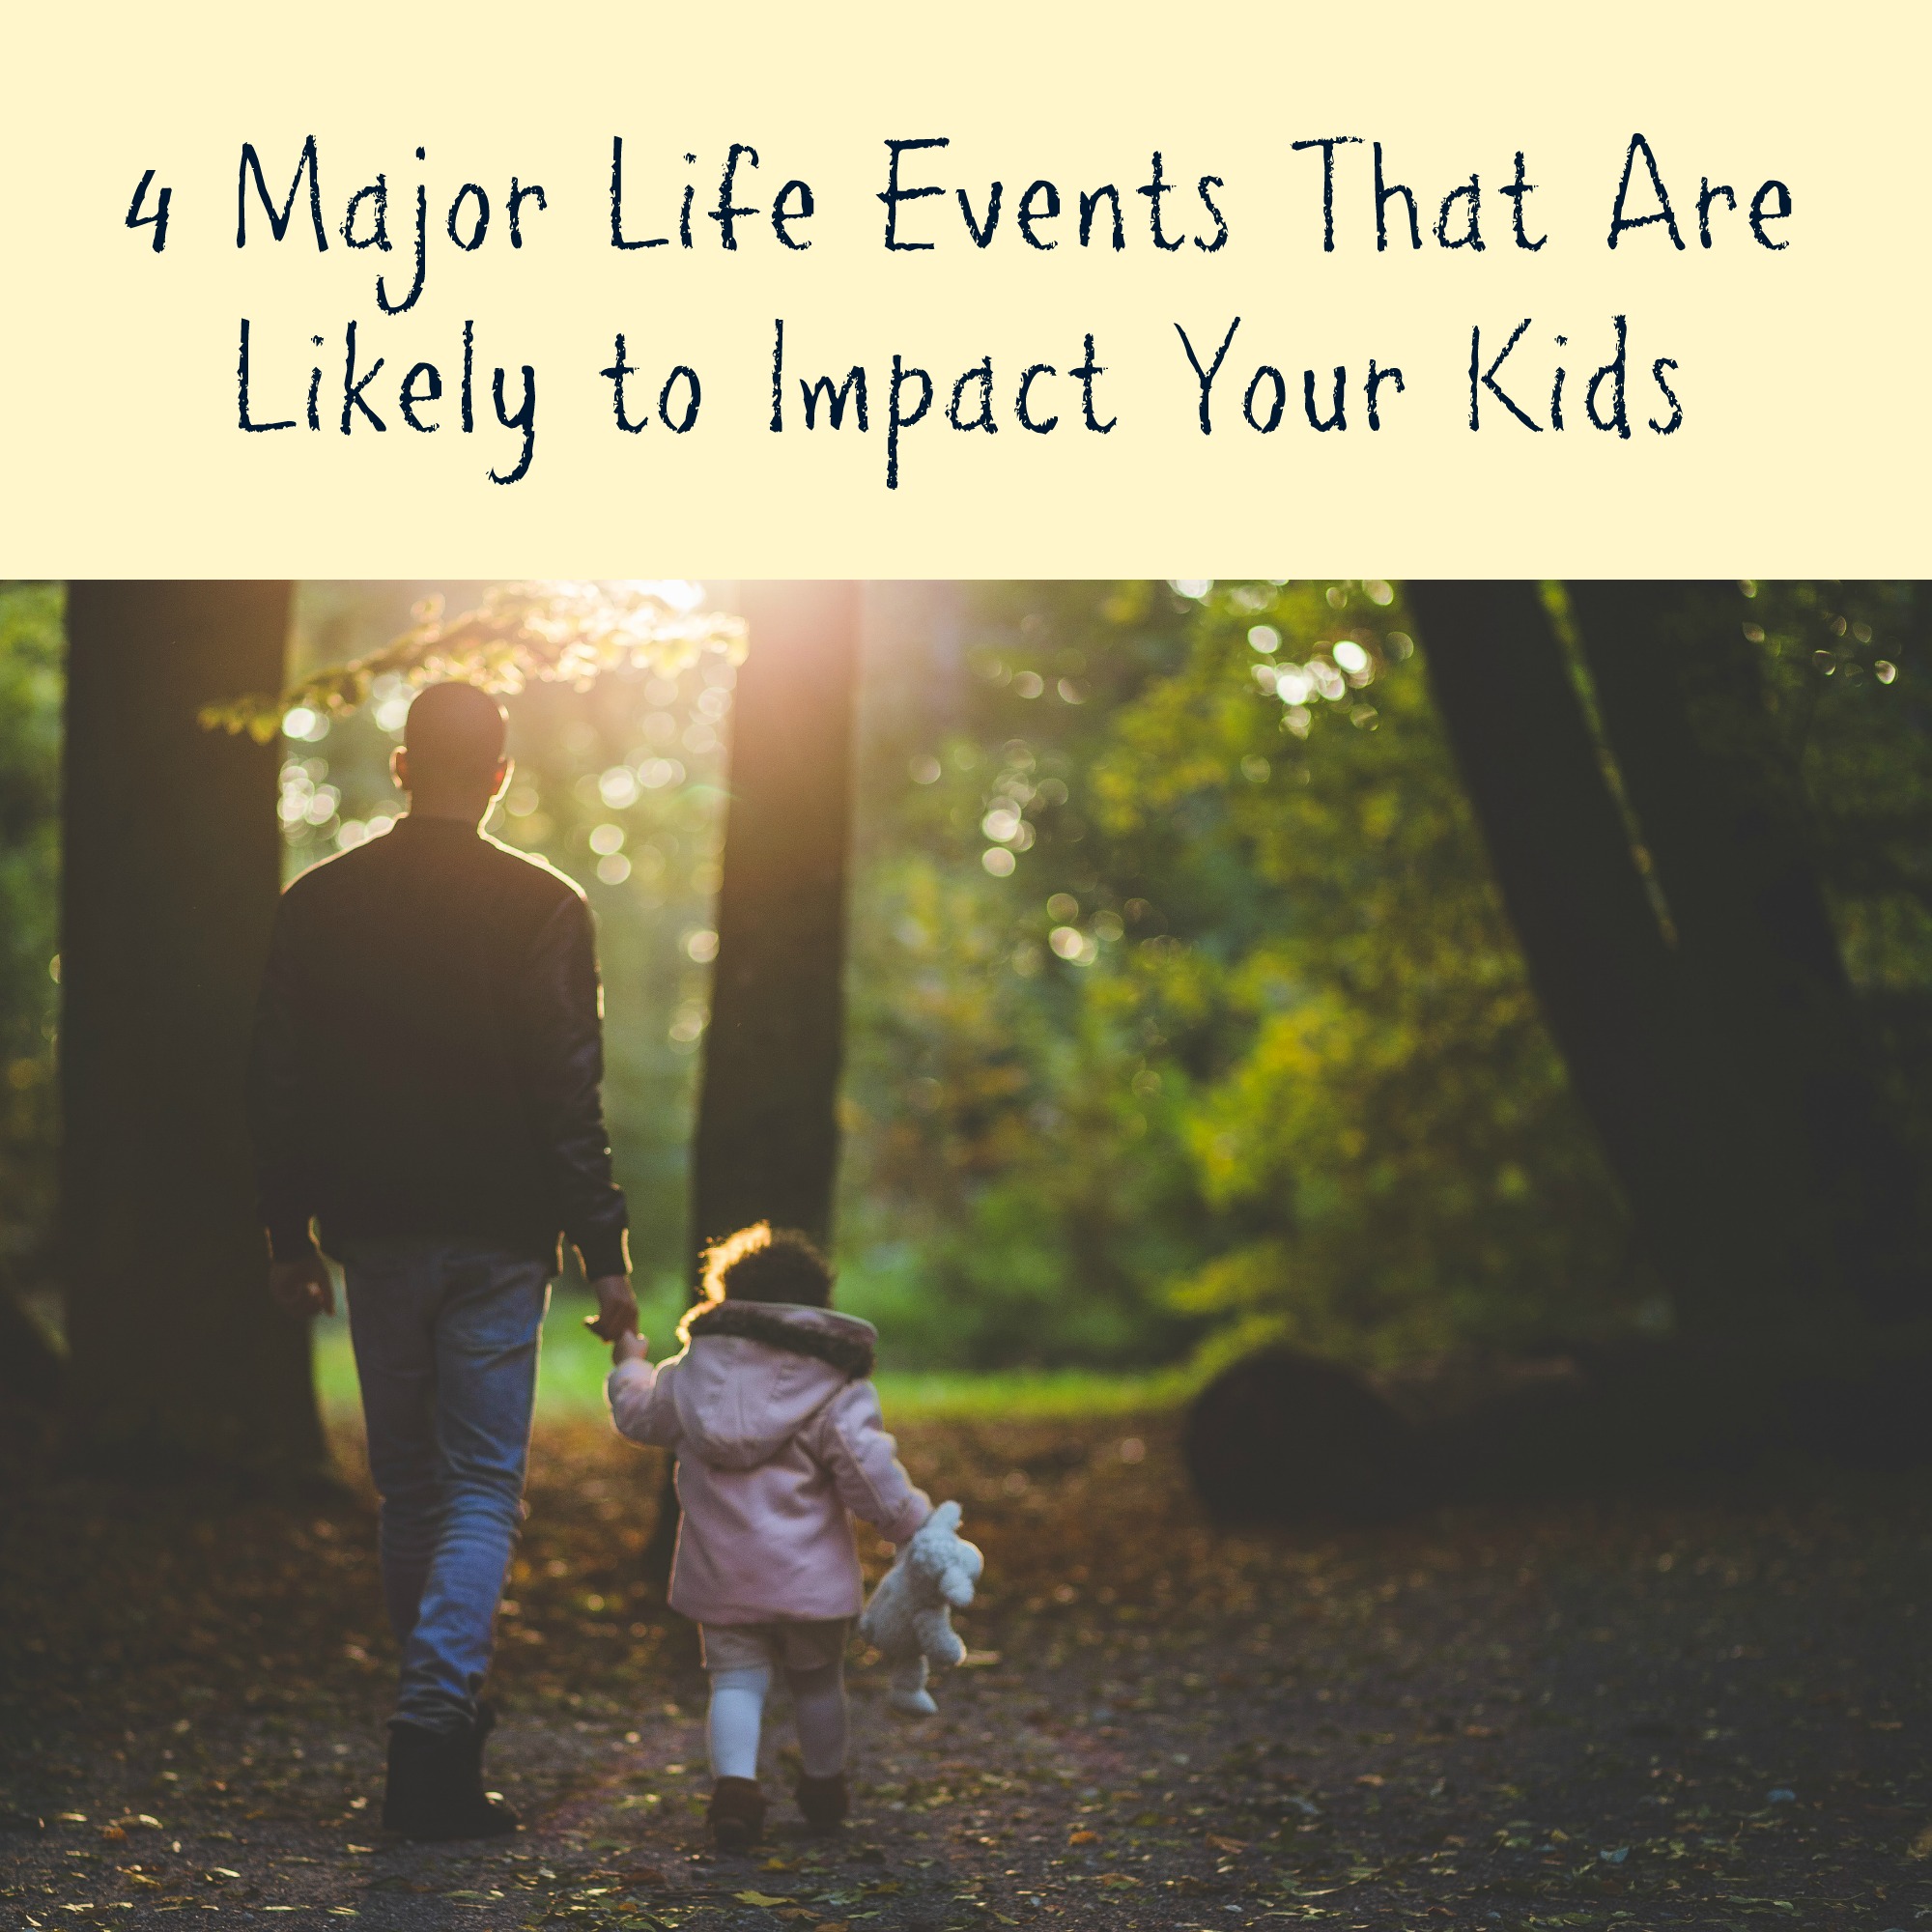 4 Major Life Events That Are Likely to Impact Your Kids